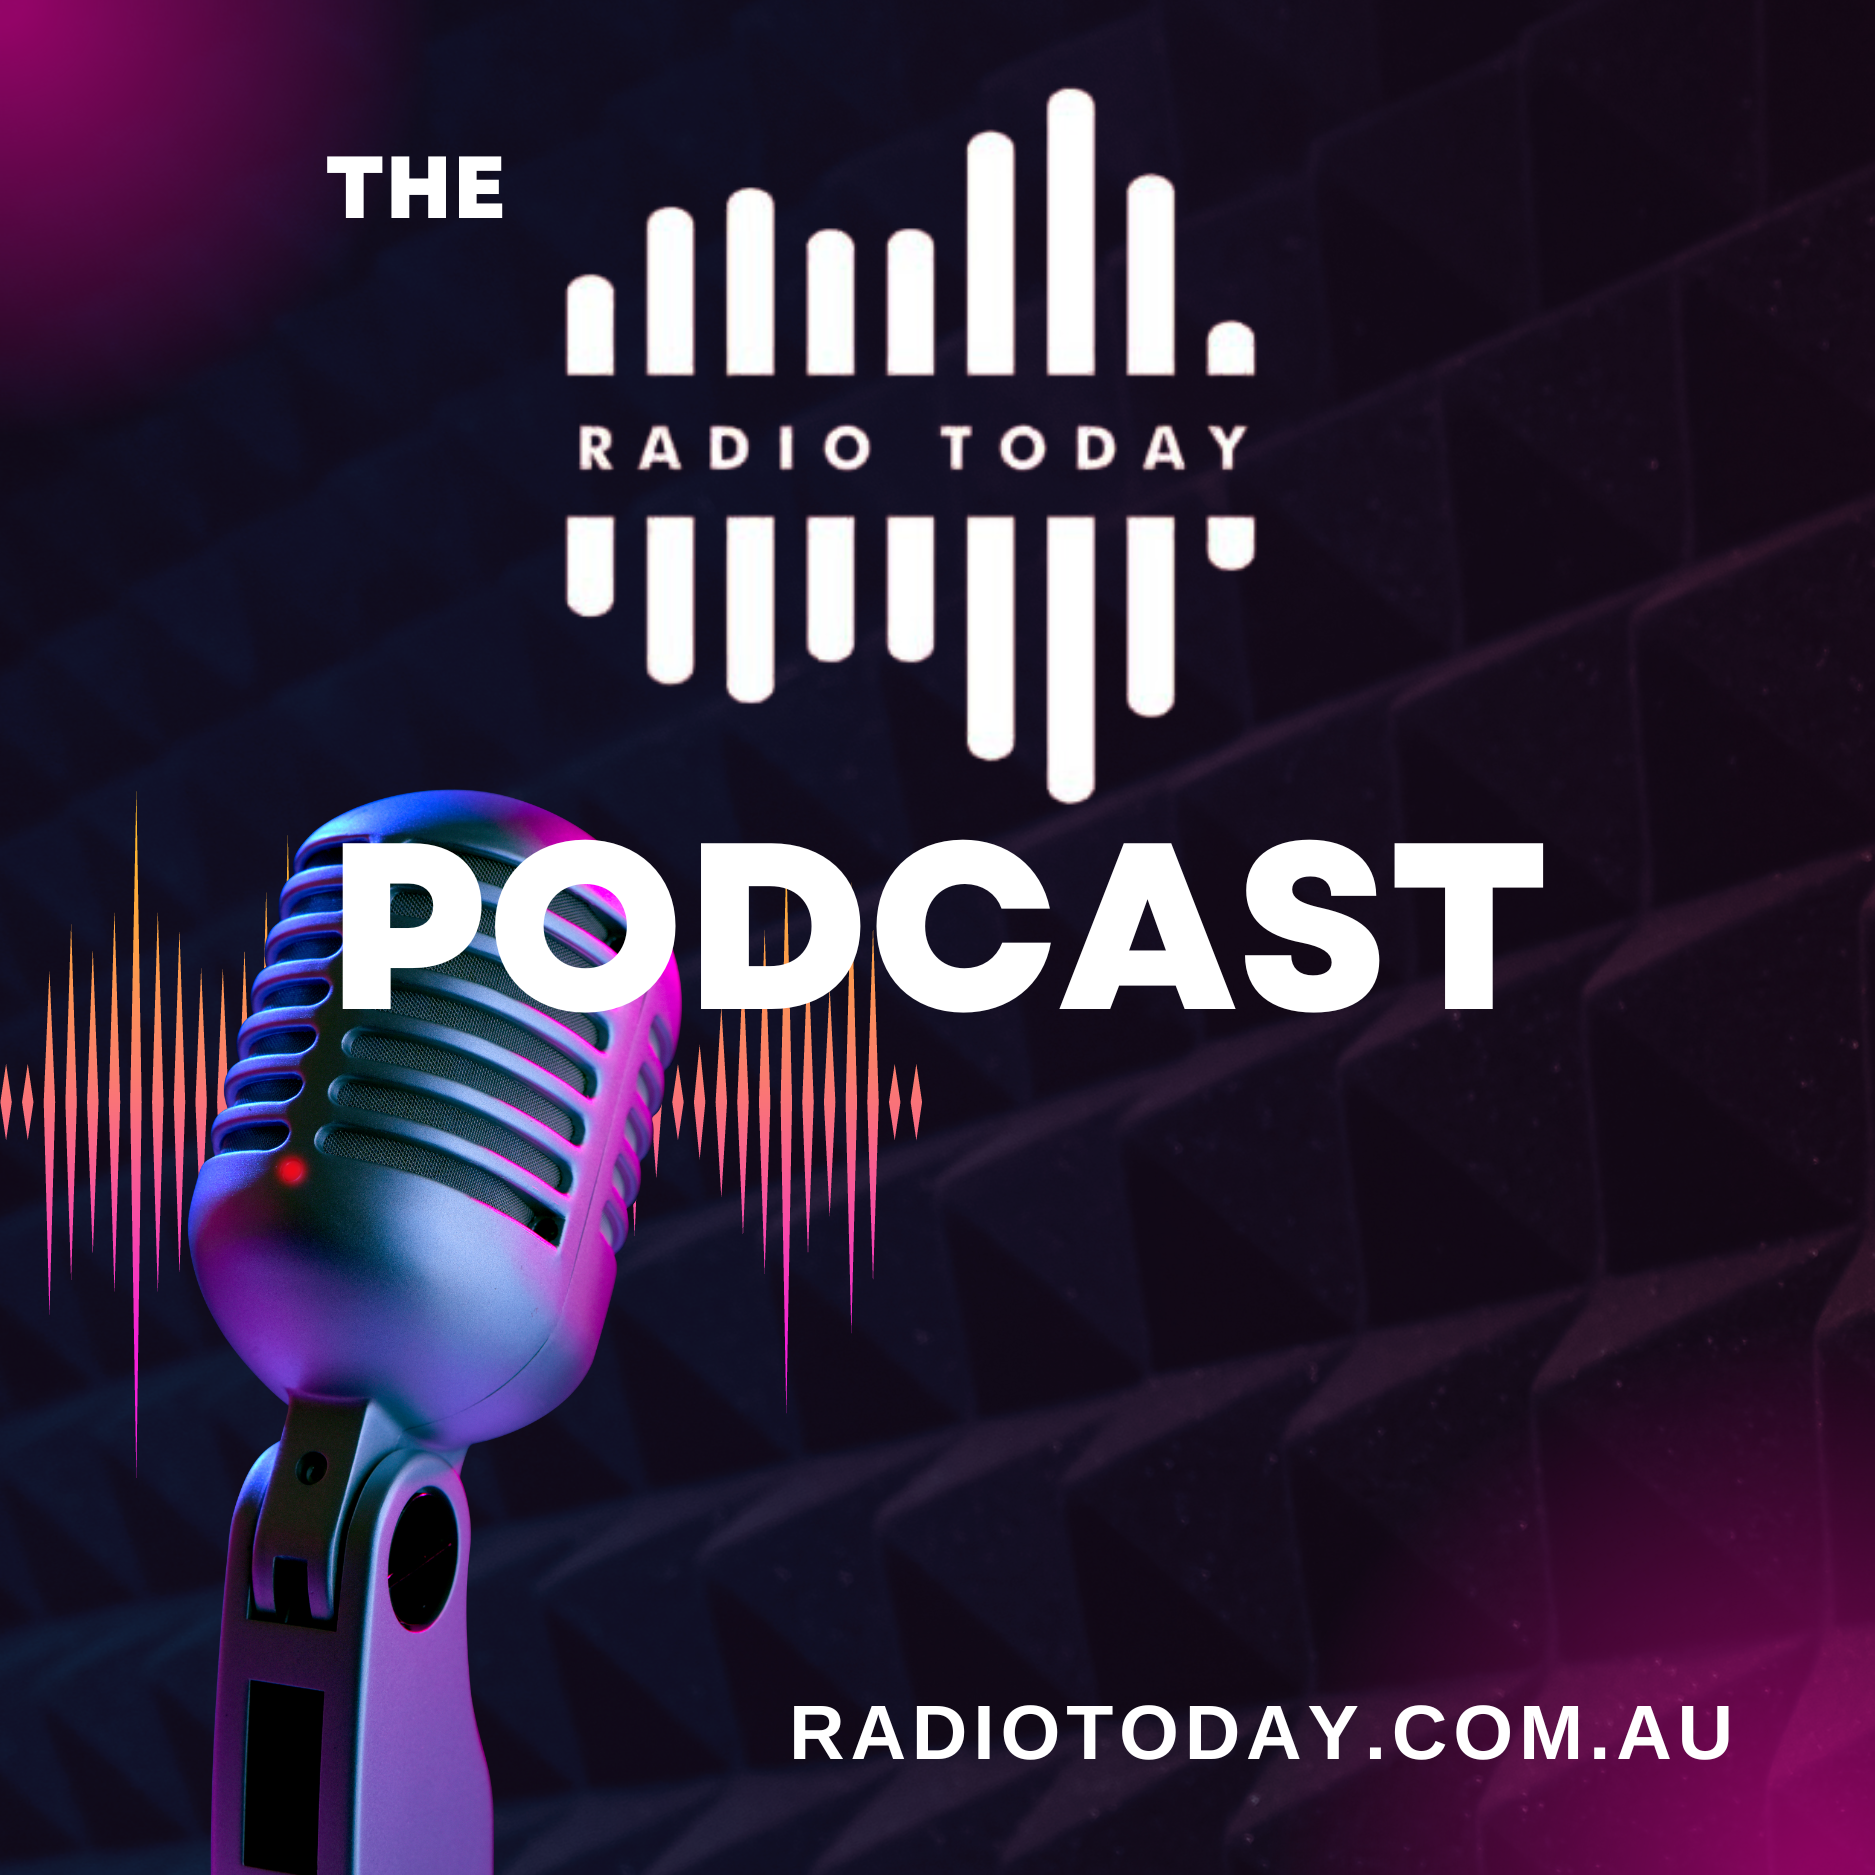 Radio Today: Canberra and Townsville Survey Results, How Much Music Do Stations Play + More